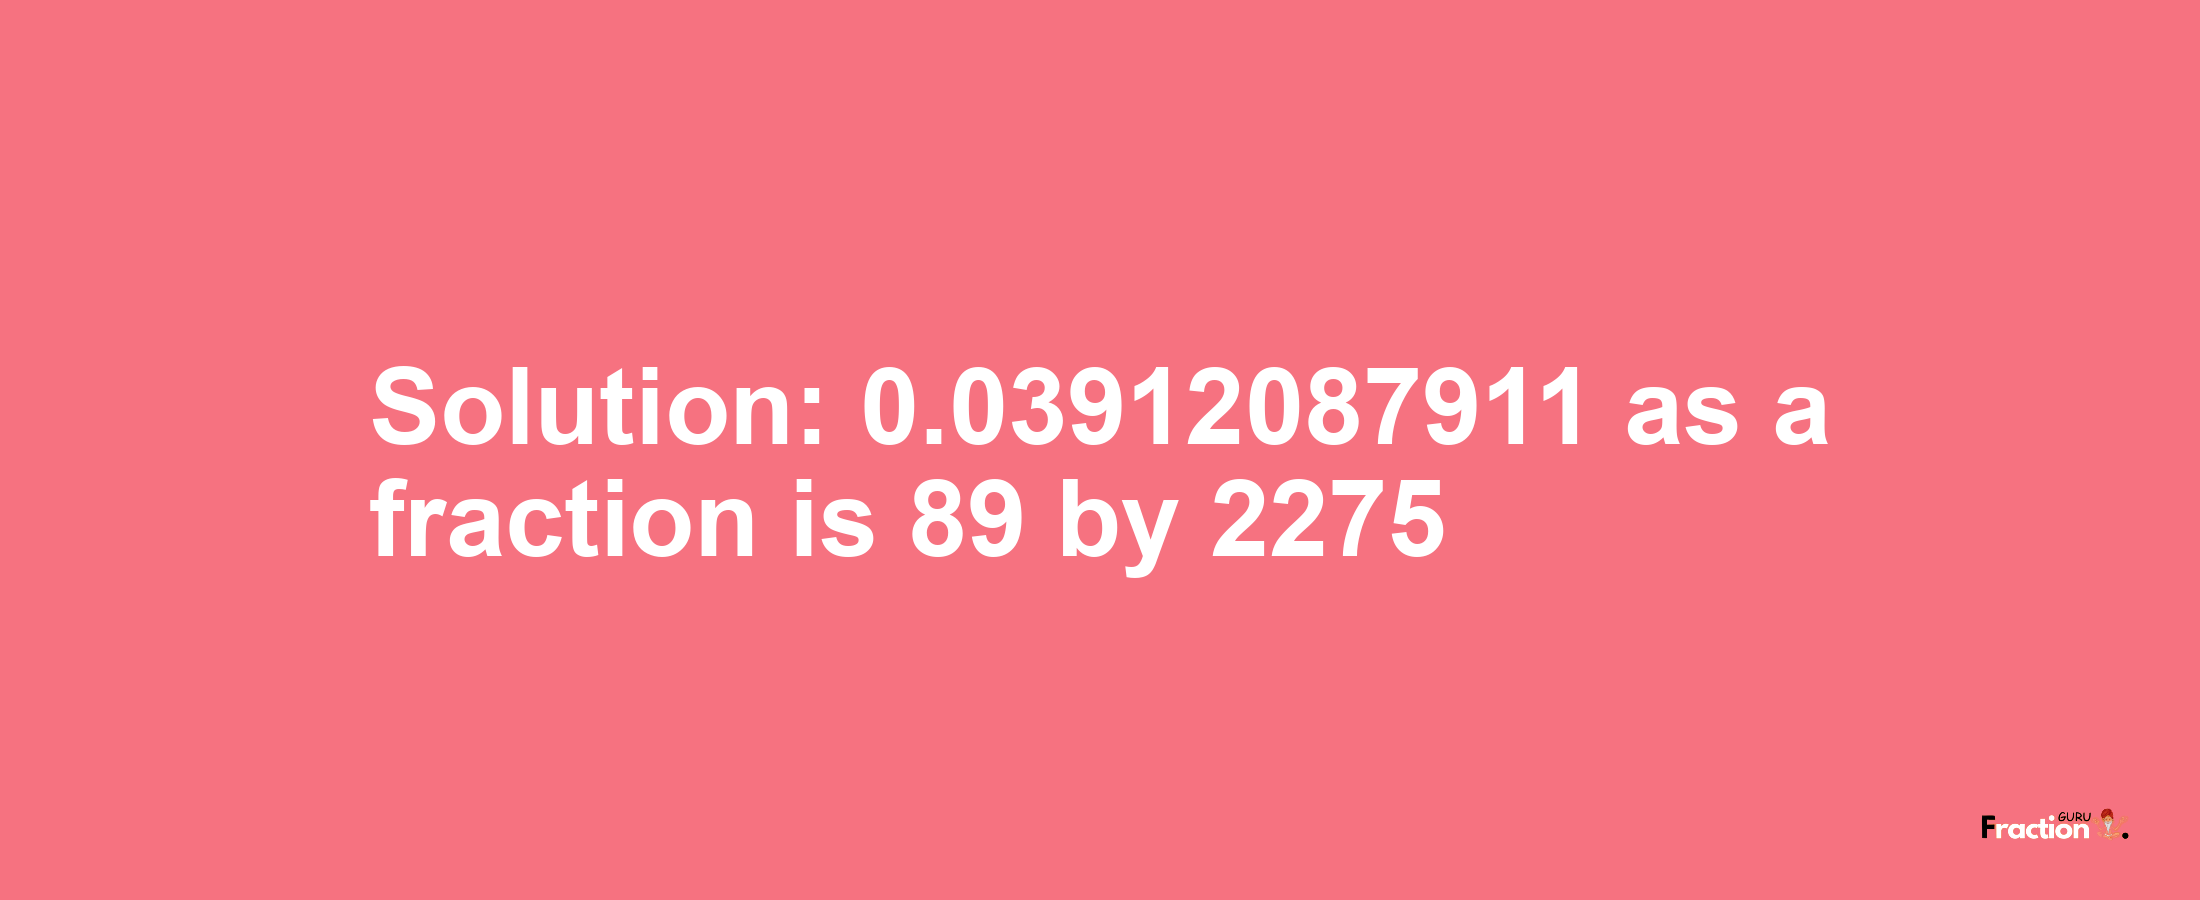 Solution:0.03912087911 as a fraction is 89/2275